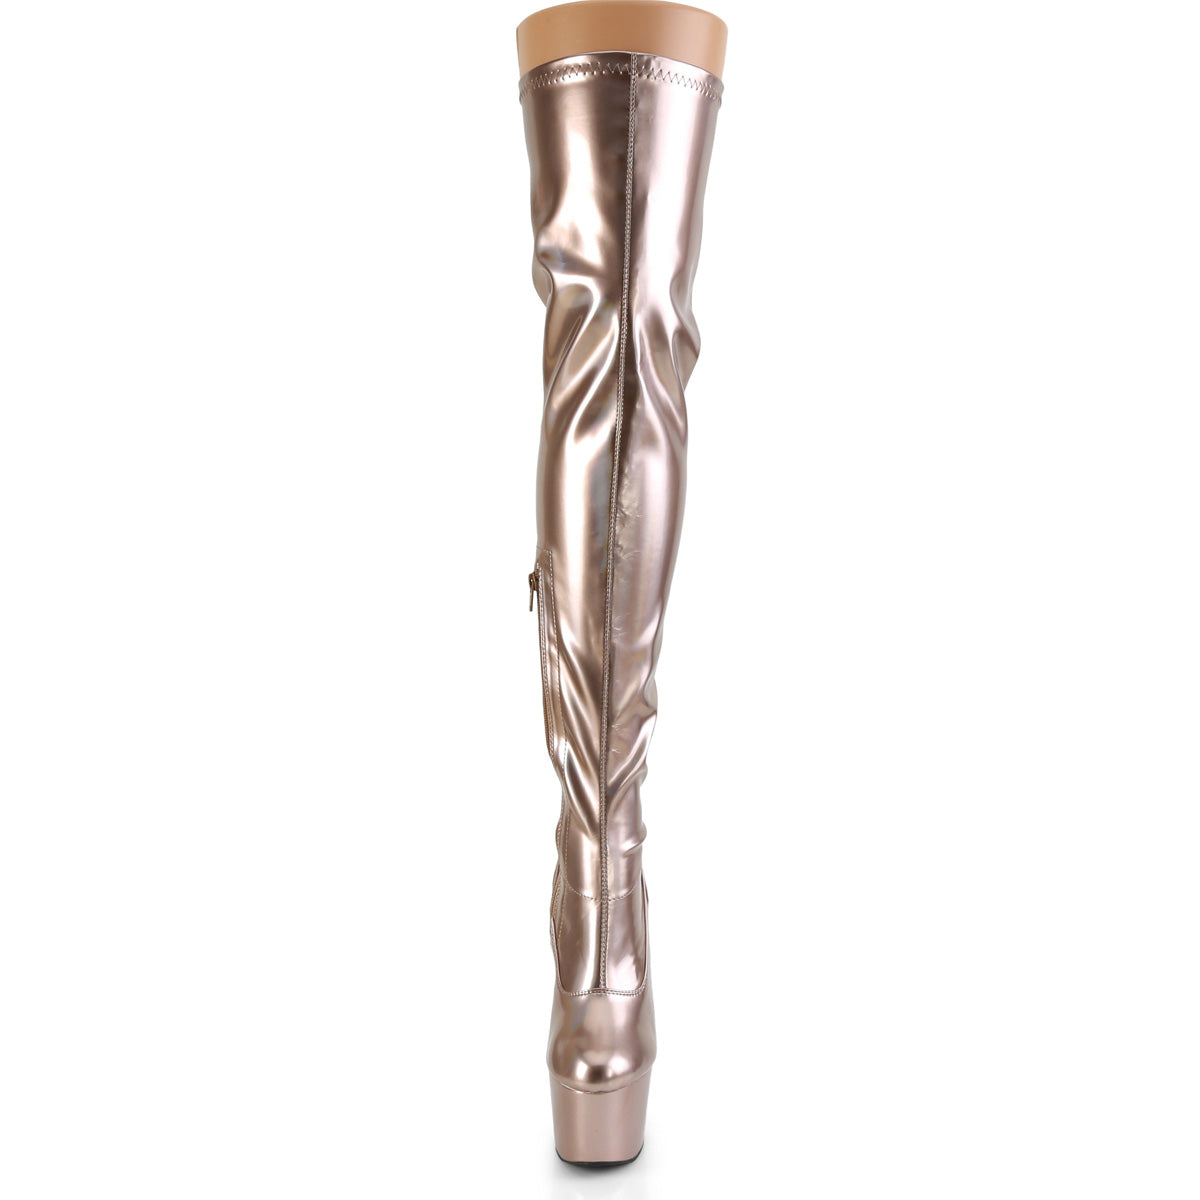 ADORE-3000HWR 7" Heel Rose Gold Holo Pole Dancer Thigh Highs-Pleaser- Sexy Shoes Alternative Footwear